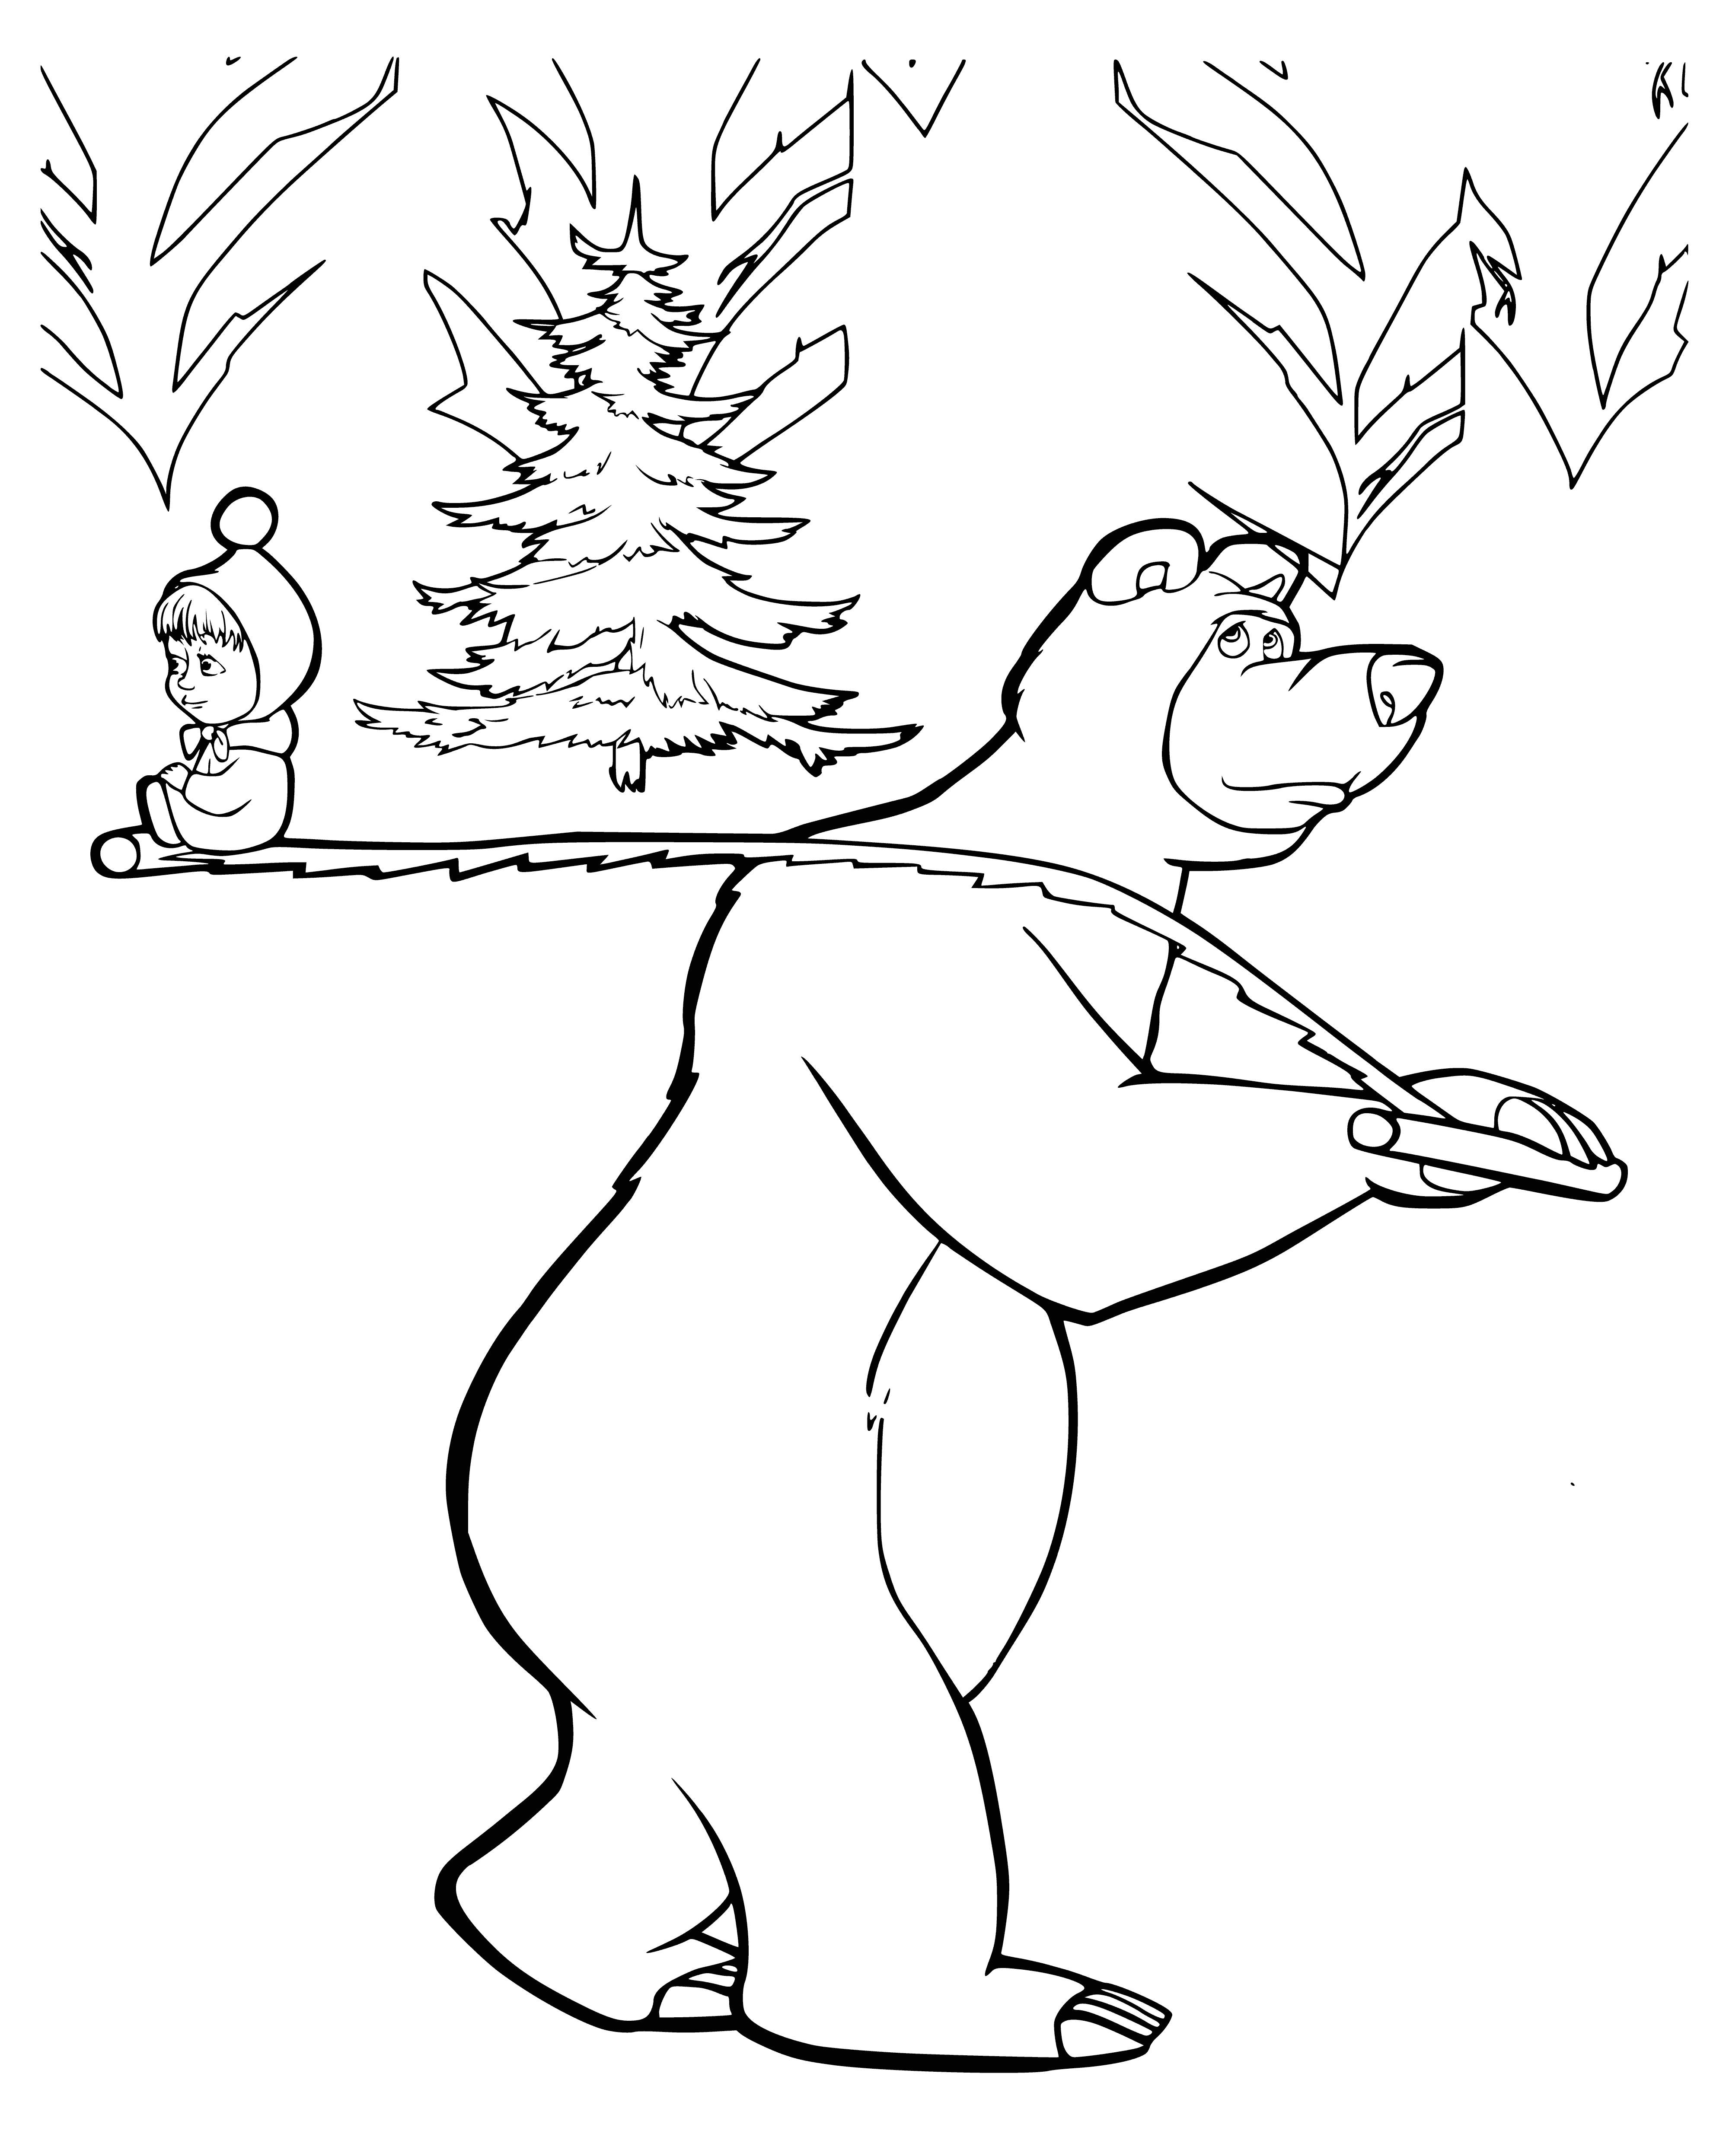 coloring page: Masha, a small bear, and her larger counterpart, the Bear, take a hug break and smile together. #friendship